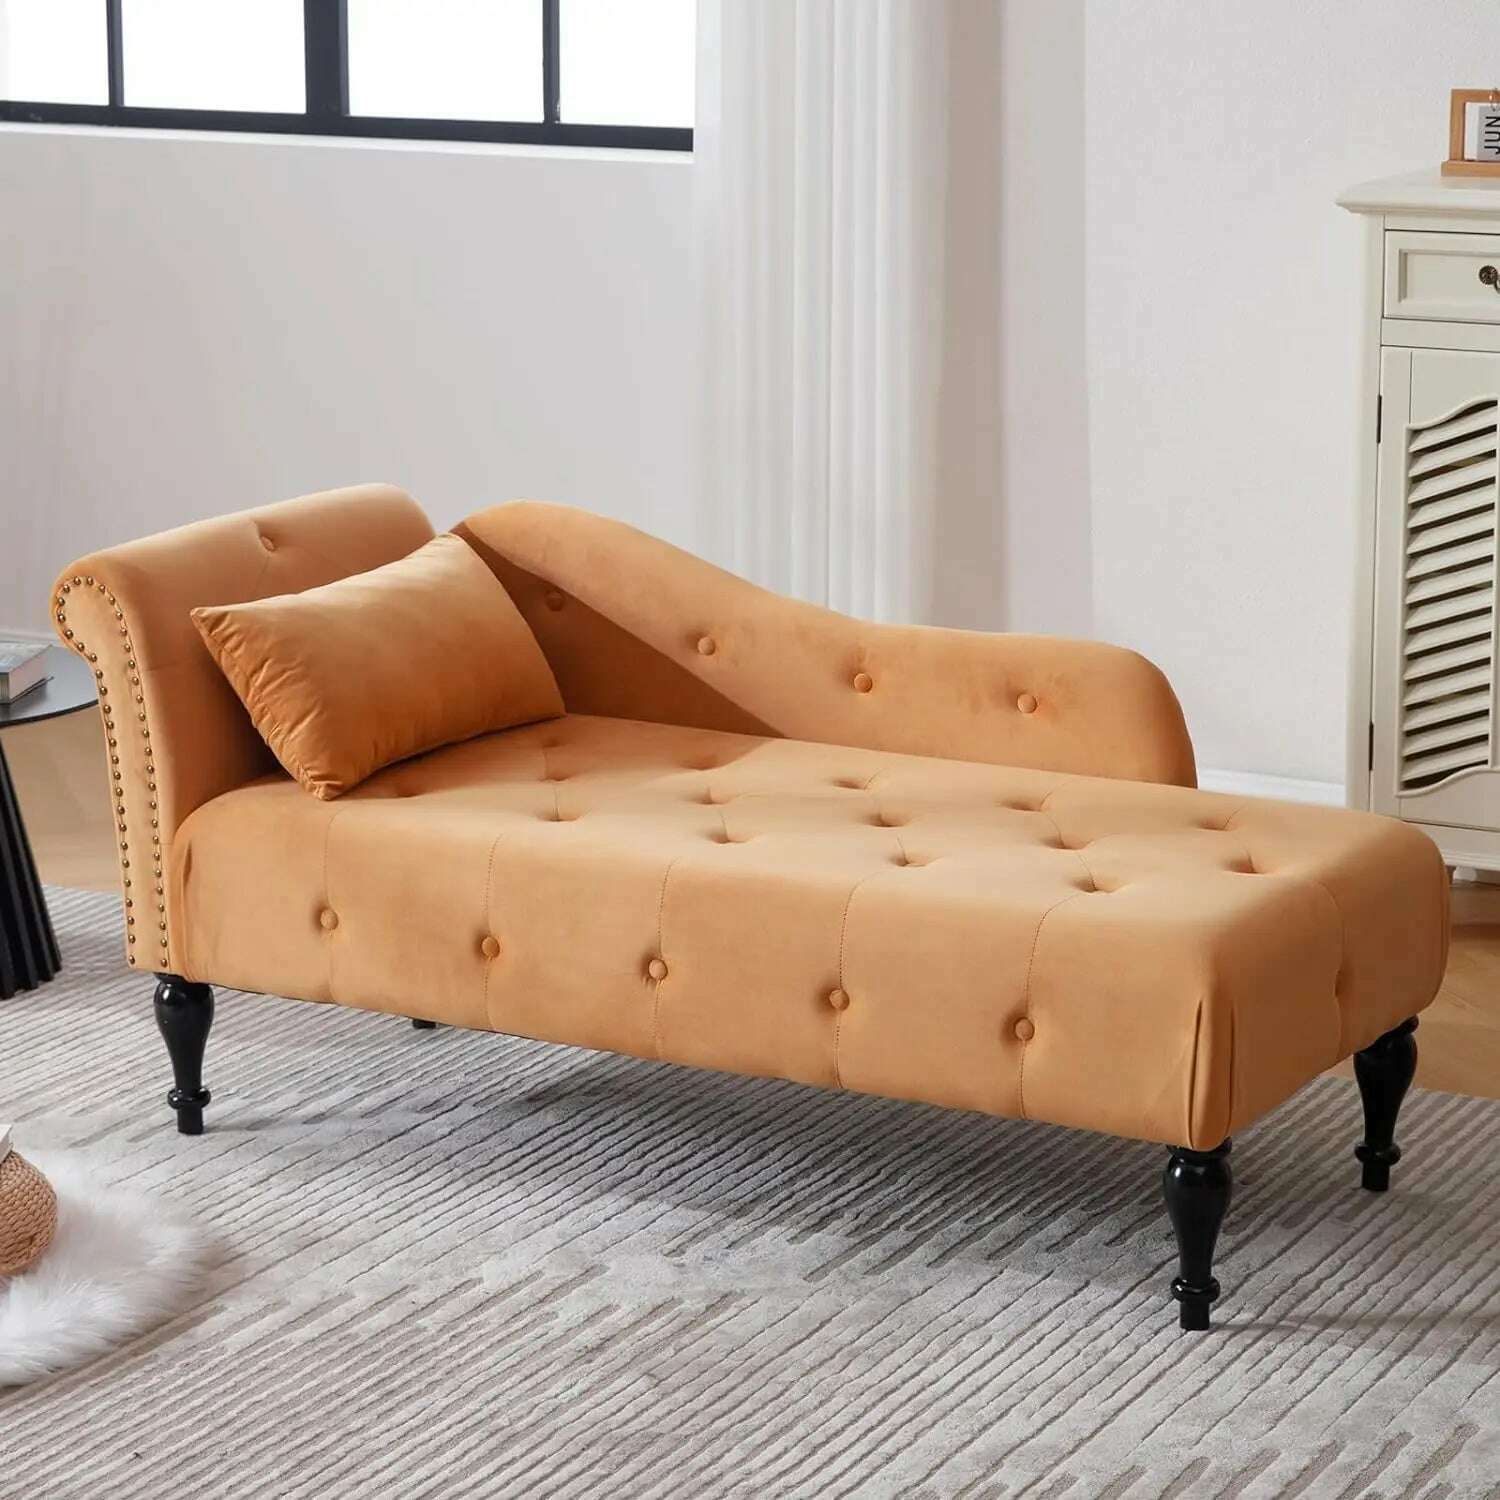 KIMLUD, Tufted Velvet Chaise Lounge Chair Indoor, Modern Upholstered Rolled Arm Sofa Lounge Indoor with Nailhead Trim, Lounge Chaise, Orange / United States, KIMLUD Womens Clothes